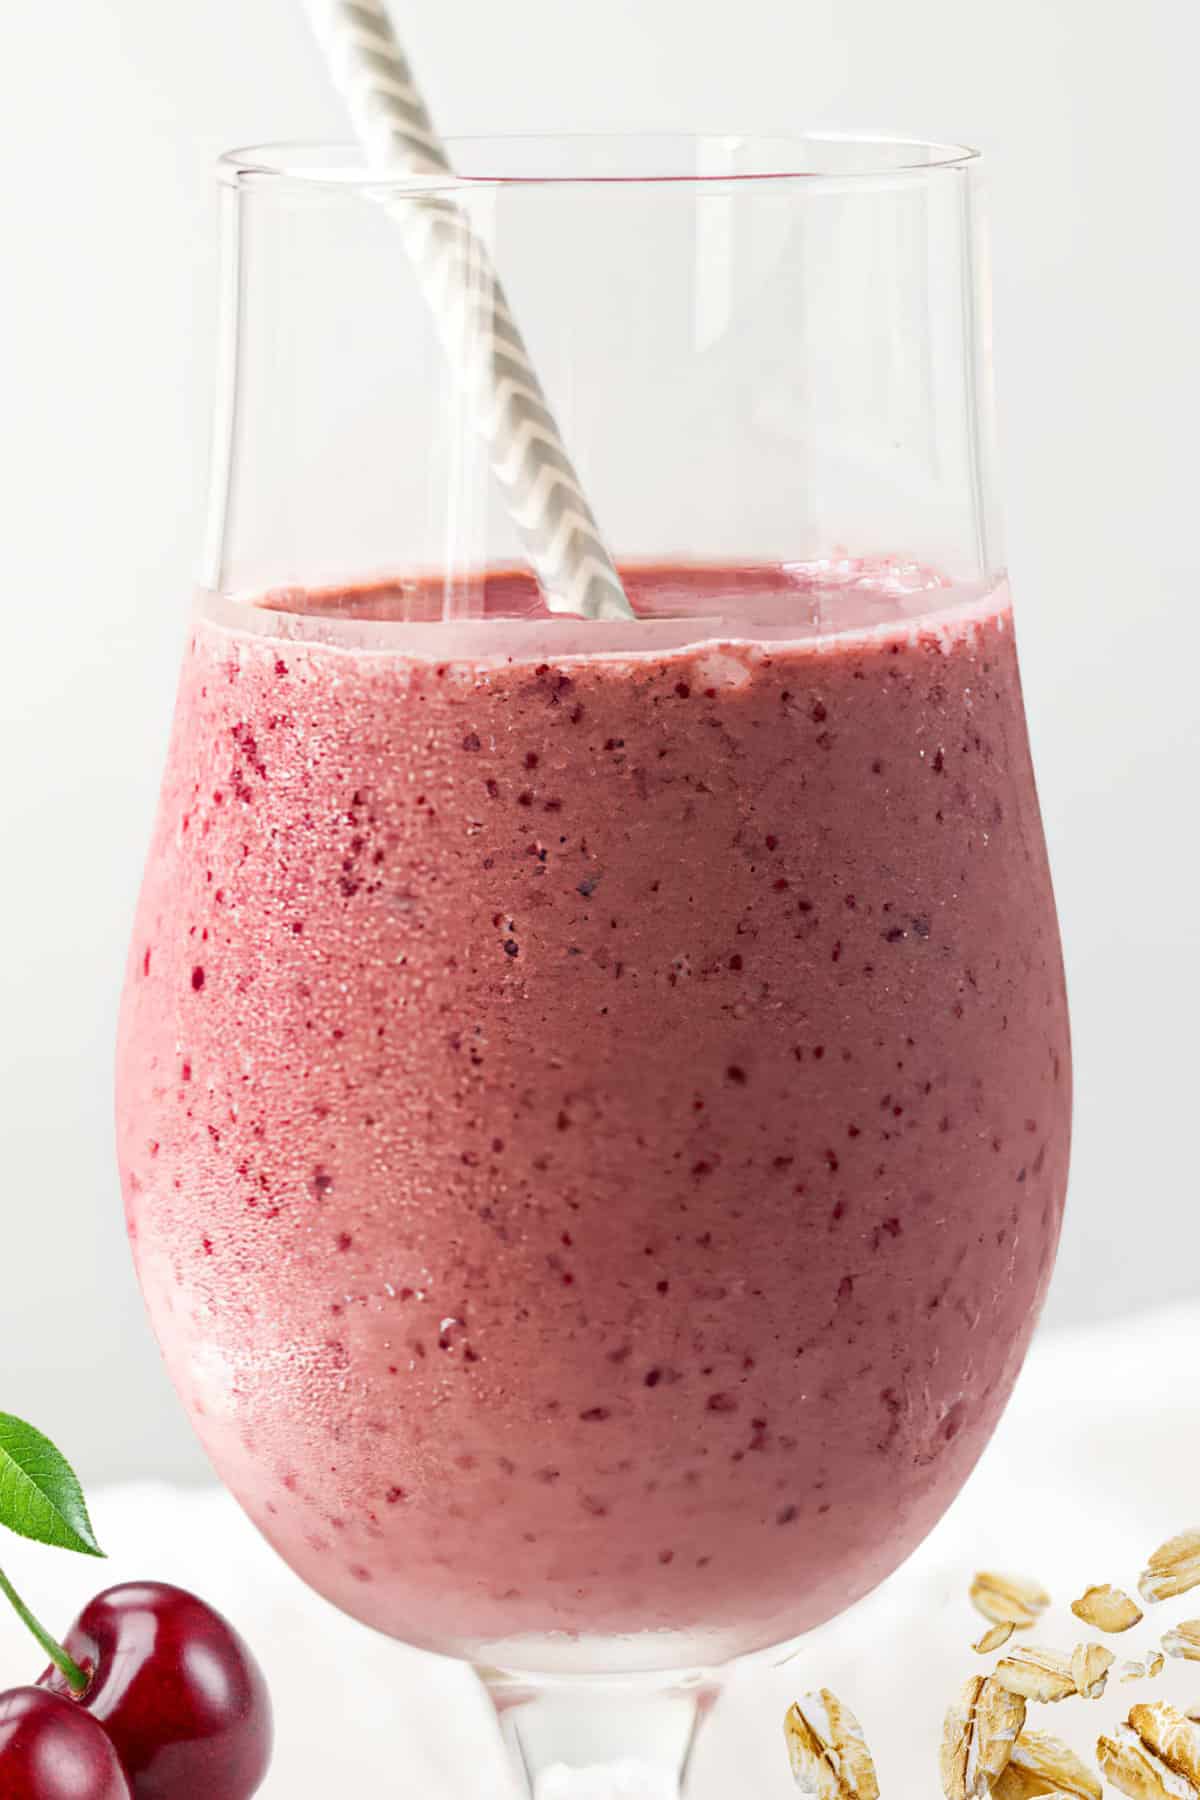 NutriBullet Cherry And Oats Bedtime Smoothie